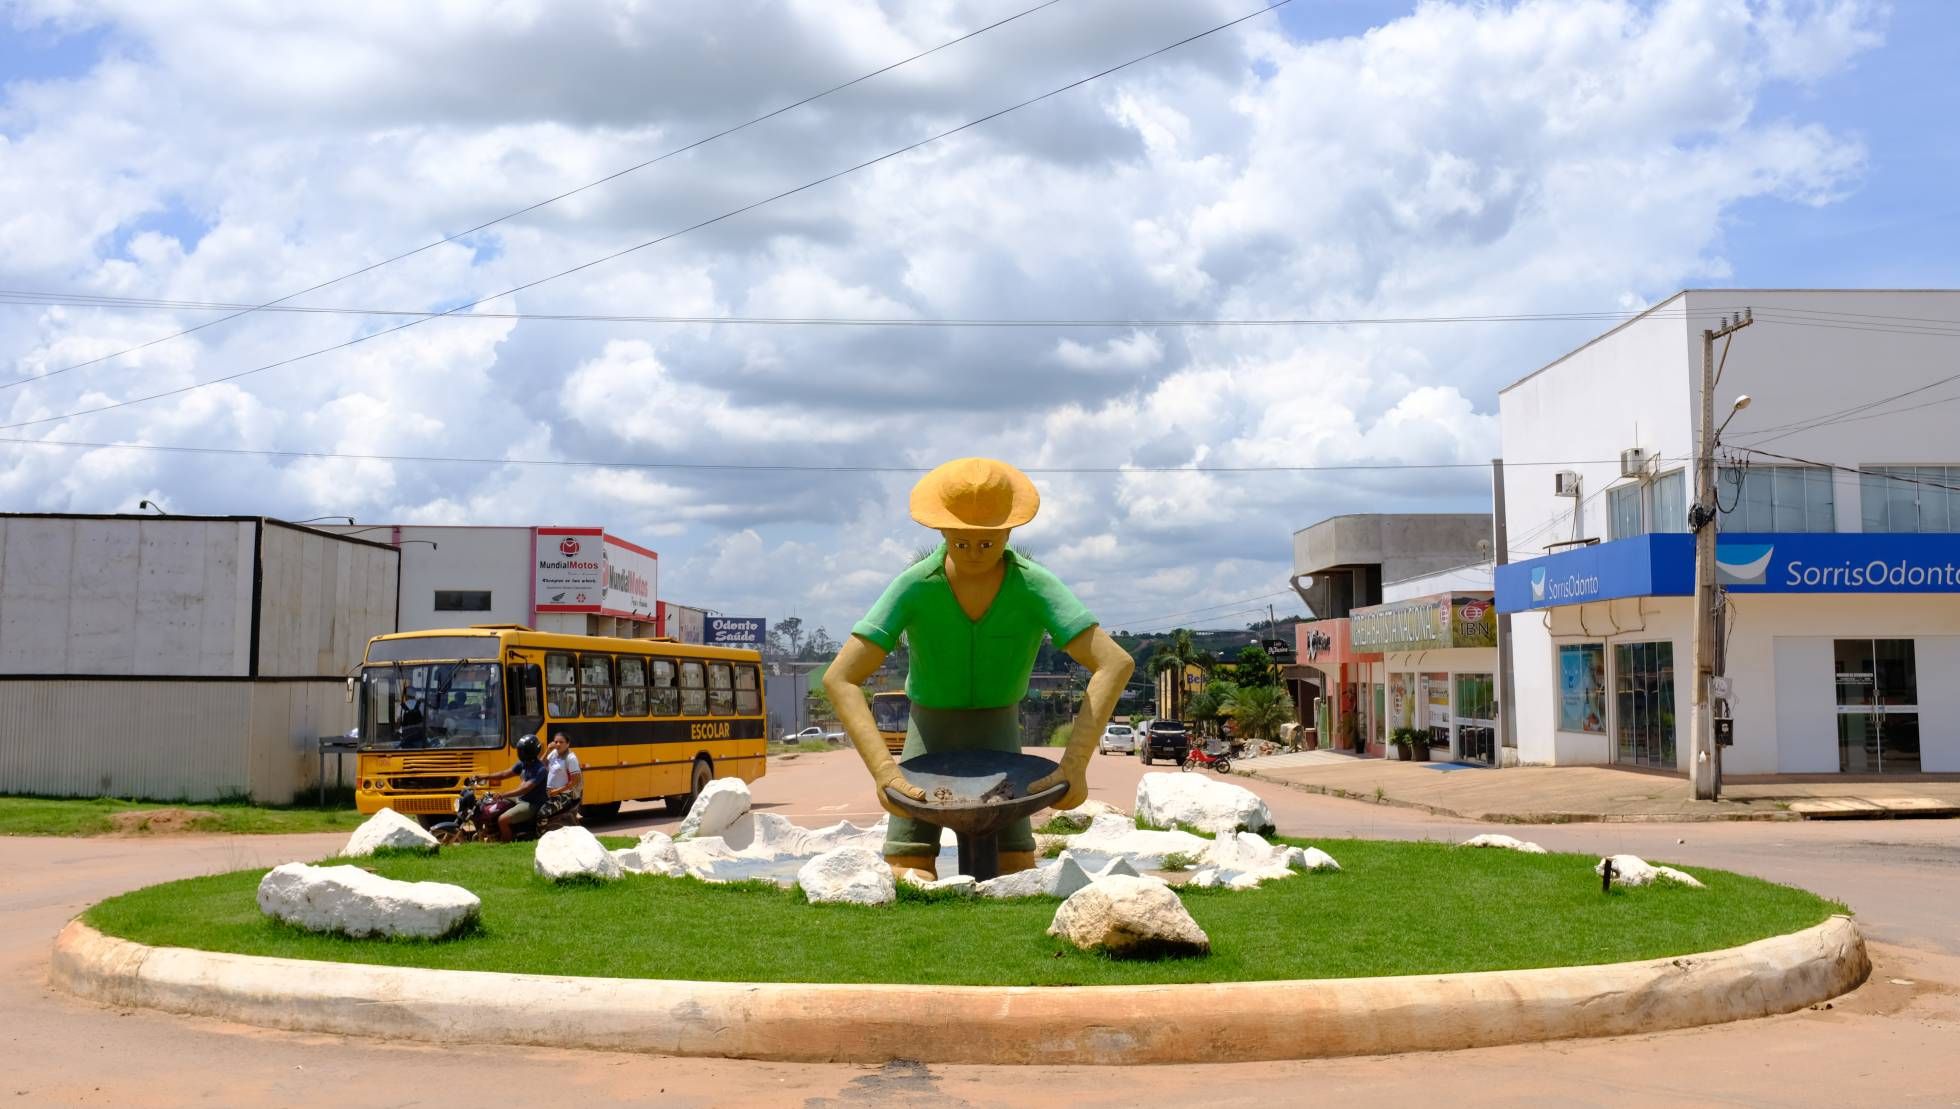 In Novo Progresso, a city in Pará that survives on gold mining, a monument honoring "garimpeiros" (small-scale gold prospectors) has been erected—despite the impacts that this kind of extractive activity, which uses mercury, can have on the environment. Image by Melissa Chan. Brazil, 2019. 